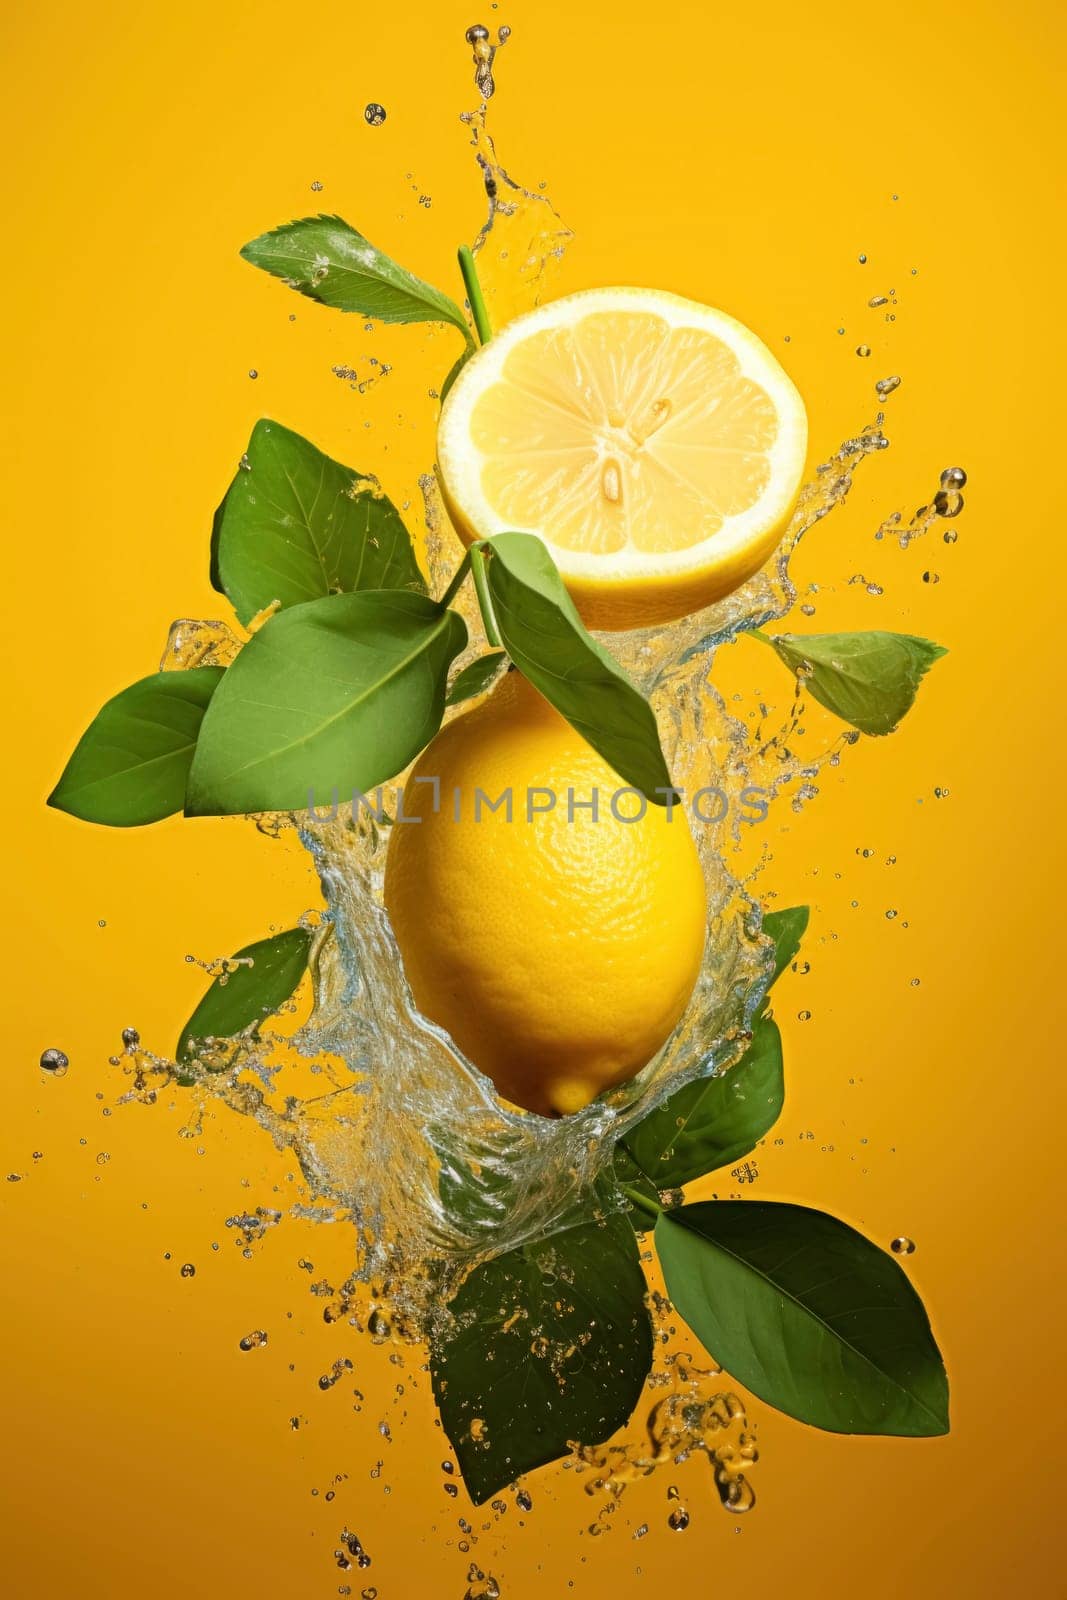 A fresh lemon with green leaves splashing in water on a bright yellow background, depicting vitality and freshness.